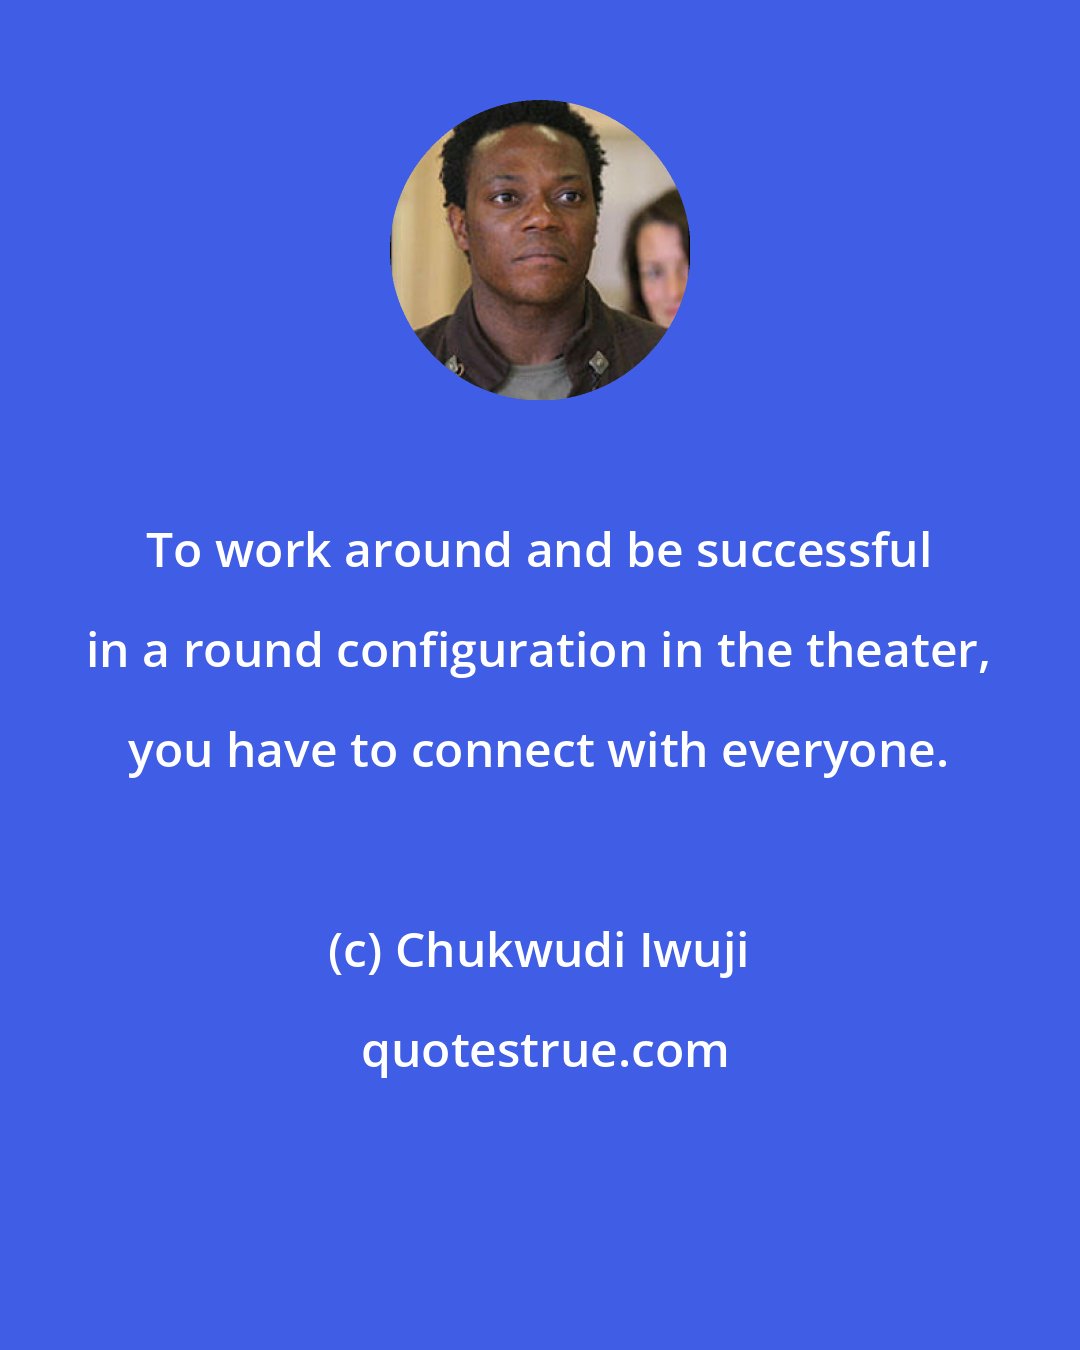 Chukwudi Iwuji: To work around and be successful in a round configuration in the theater, you have to connect with everyone.